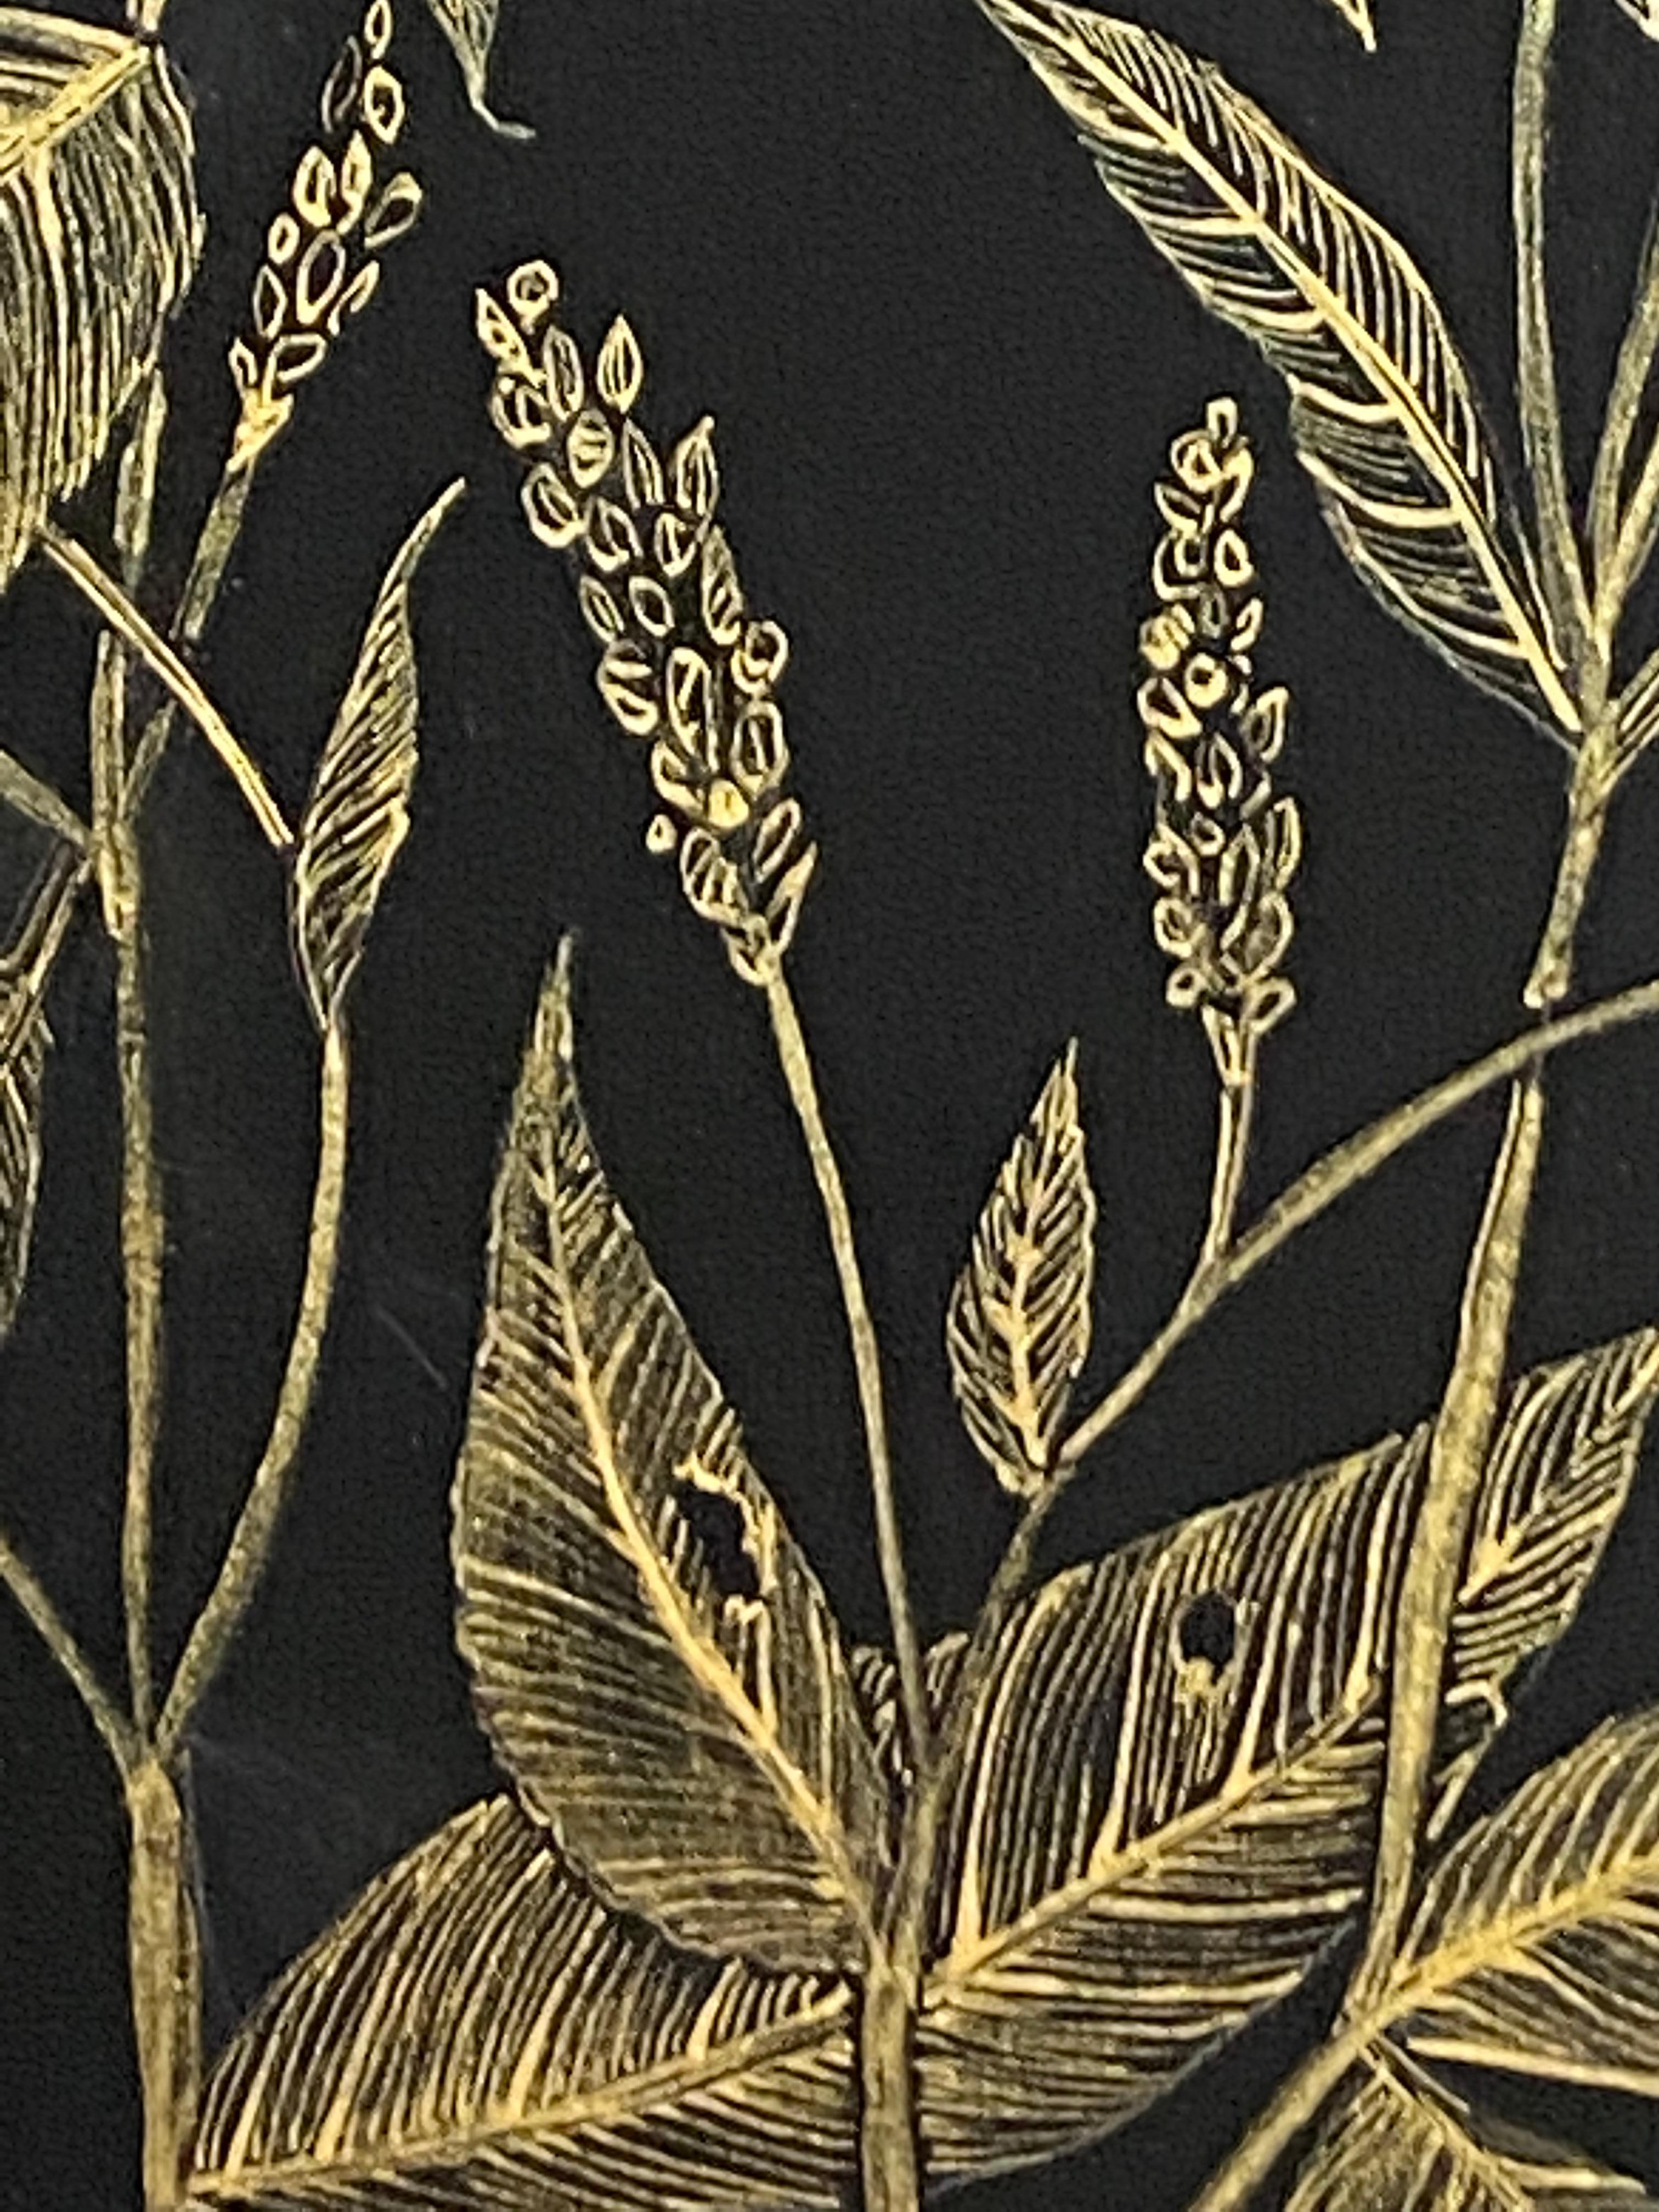 Lady's Thumb, Botanical, Metallic Gold Wildflowers, Leaves, Black Panel For Sale 2